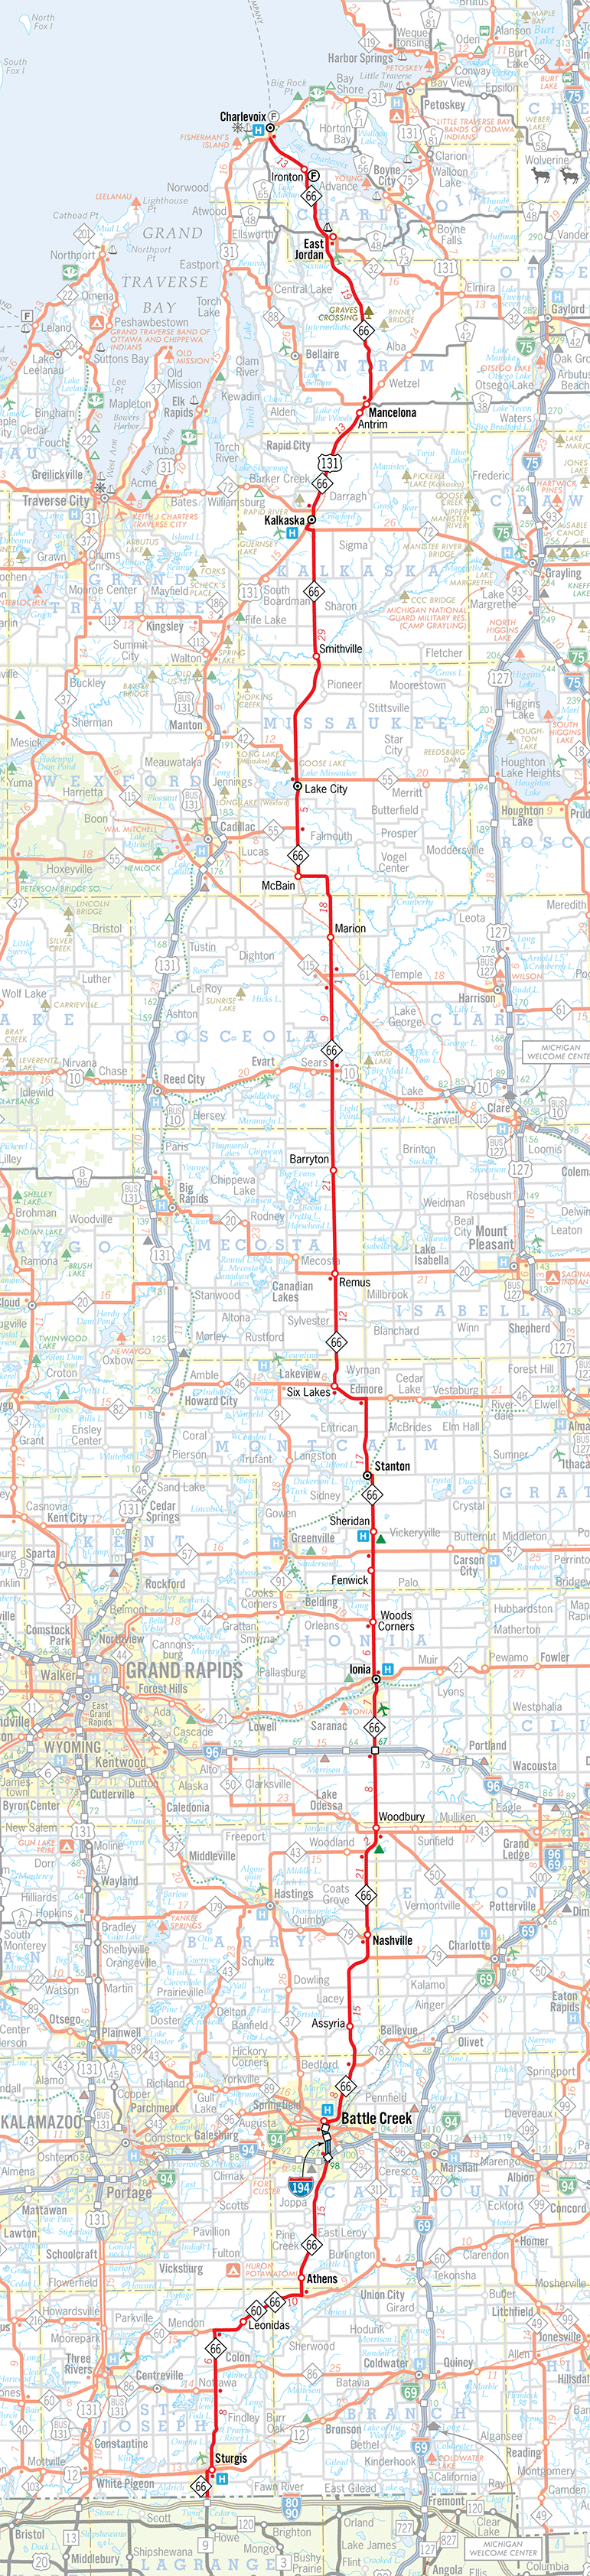 M-66 Route Map